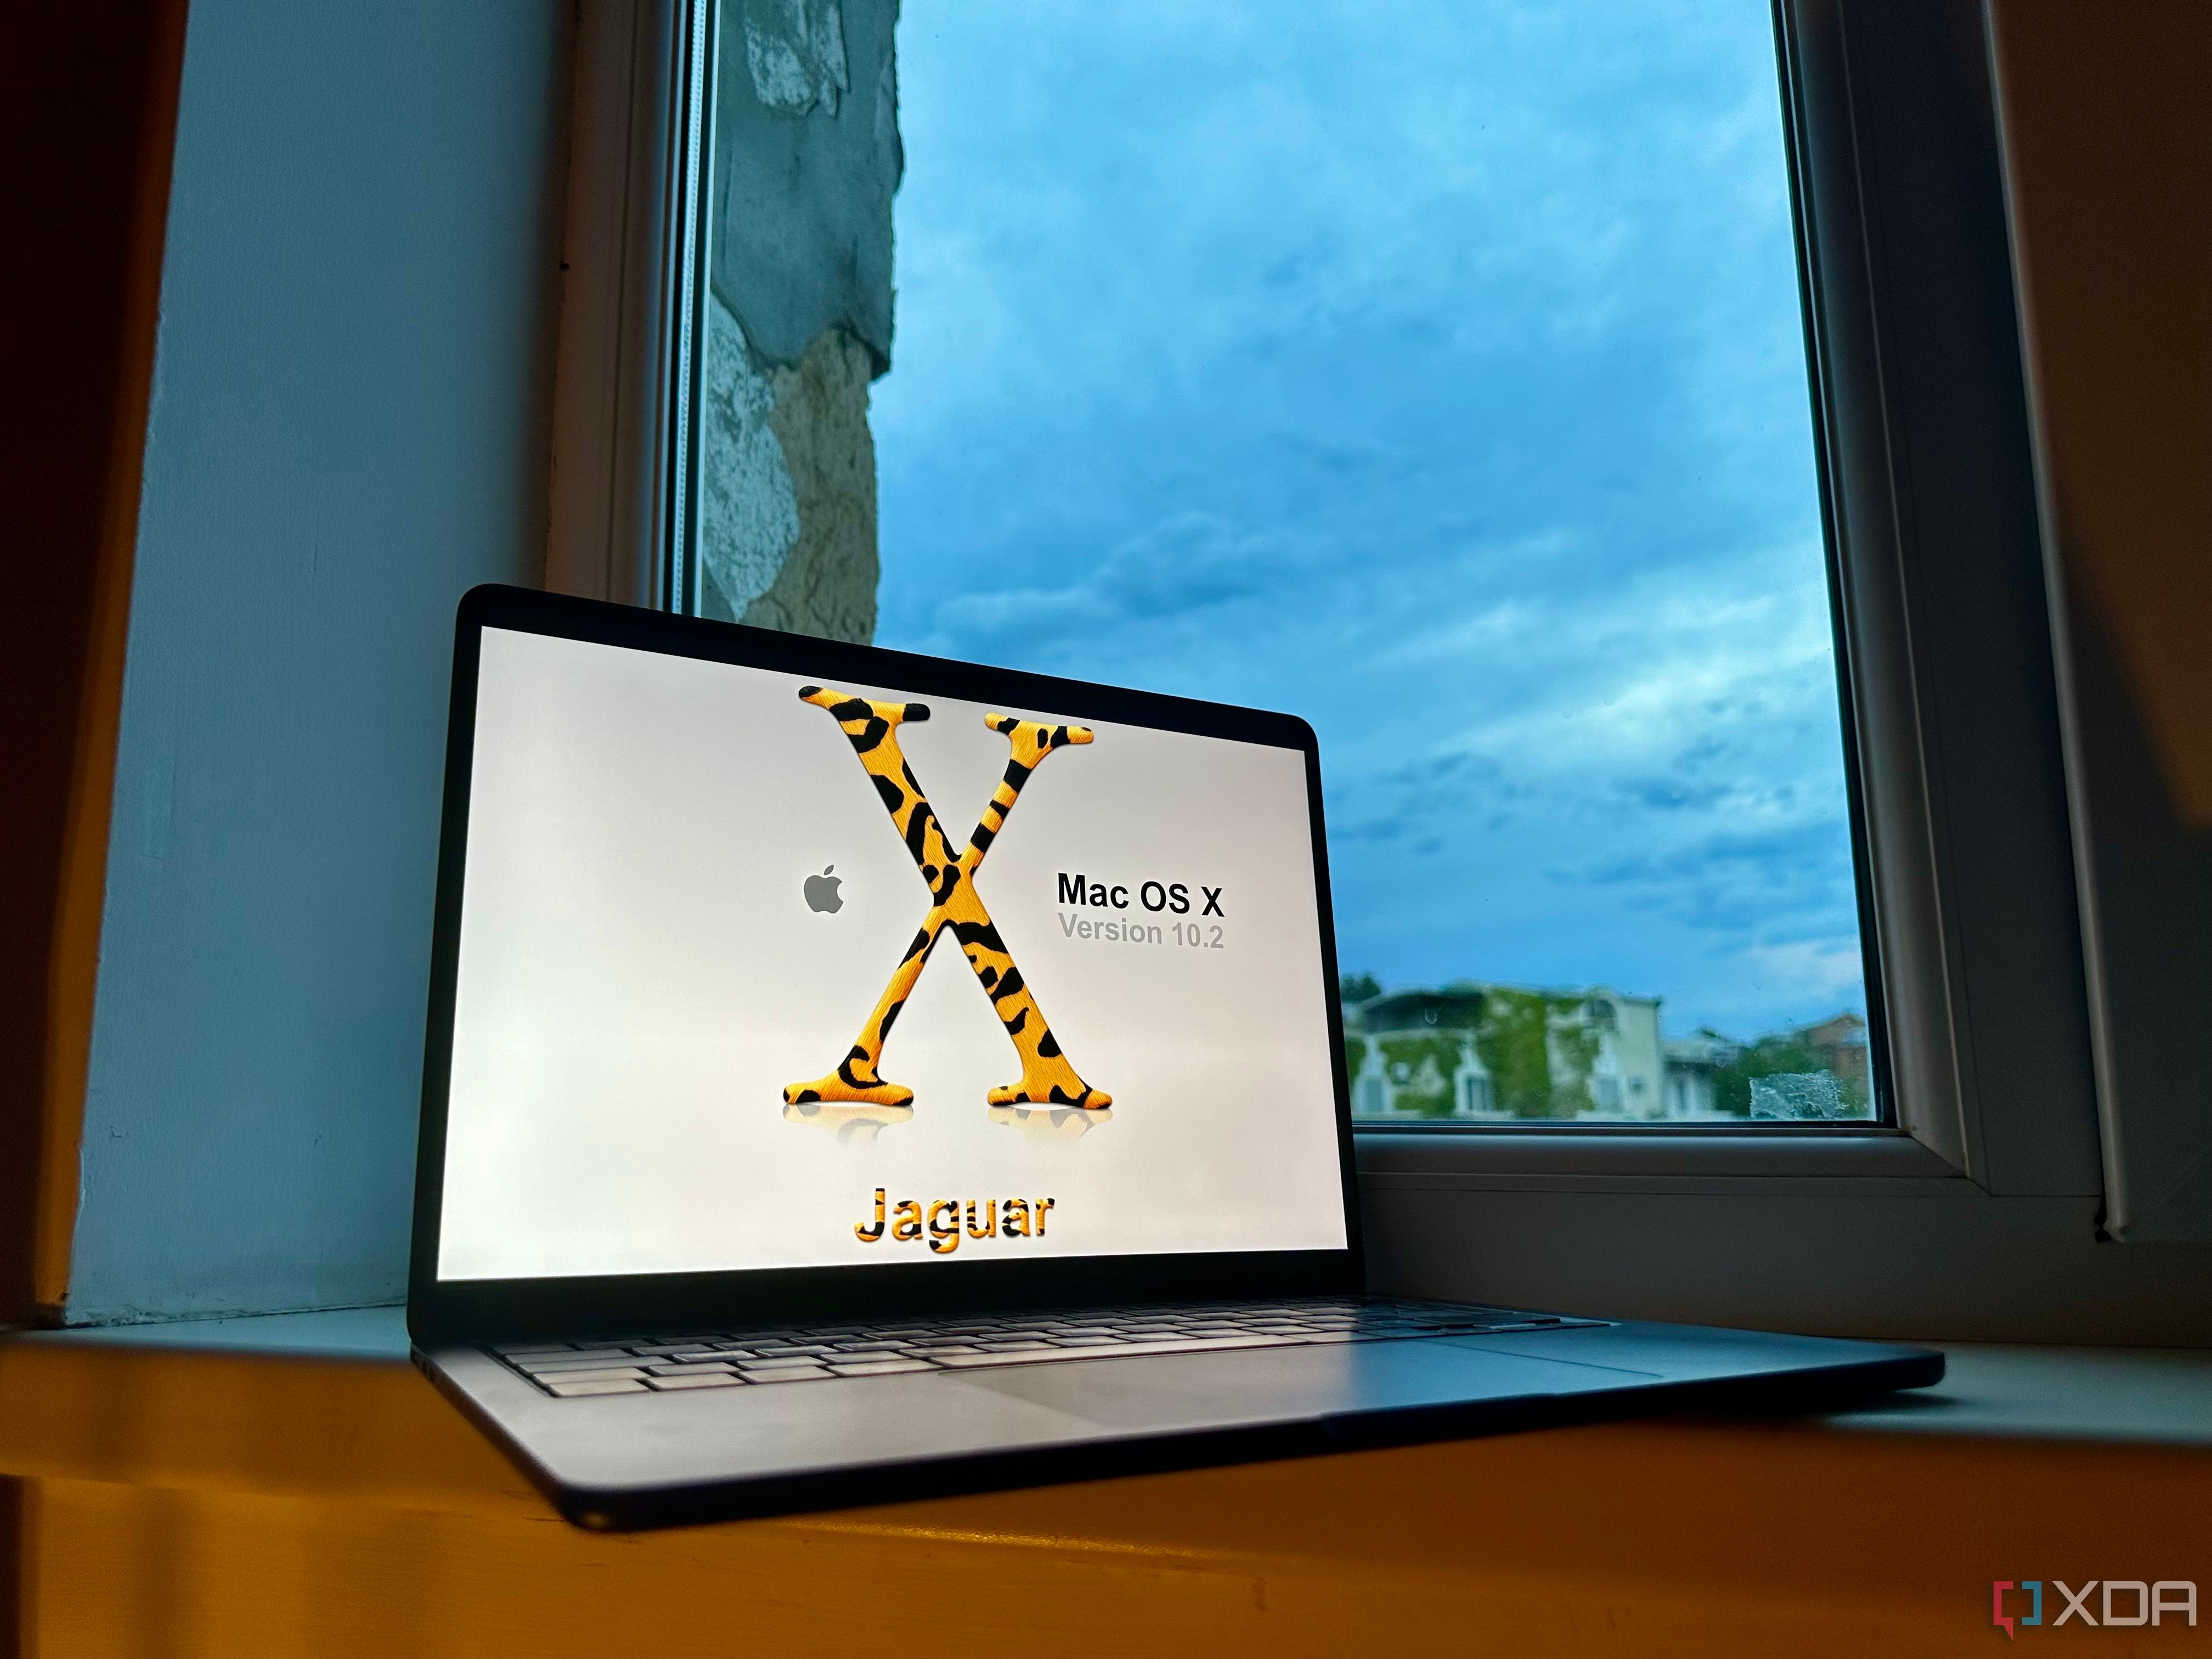 On this day in 2002, Mac OS X Jaguar launched